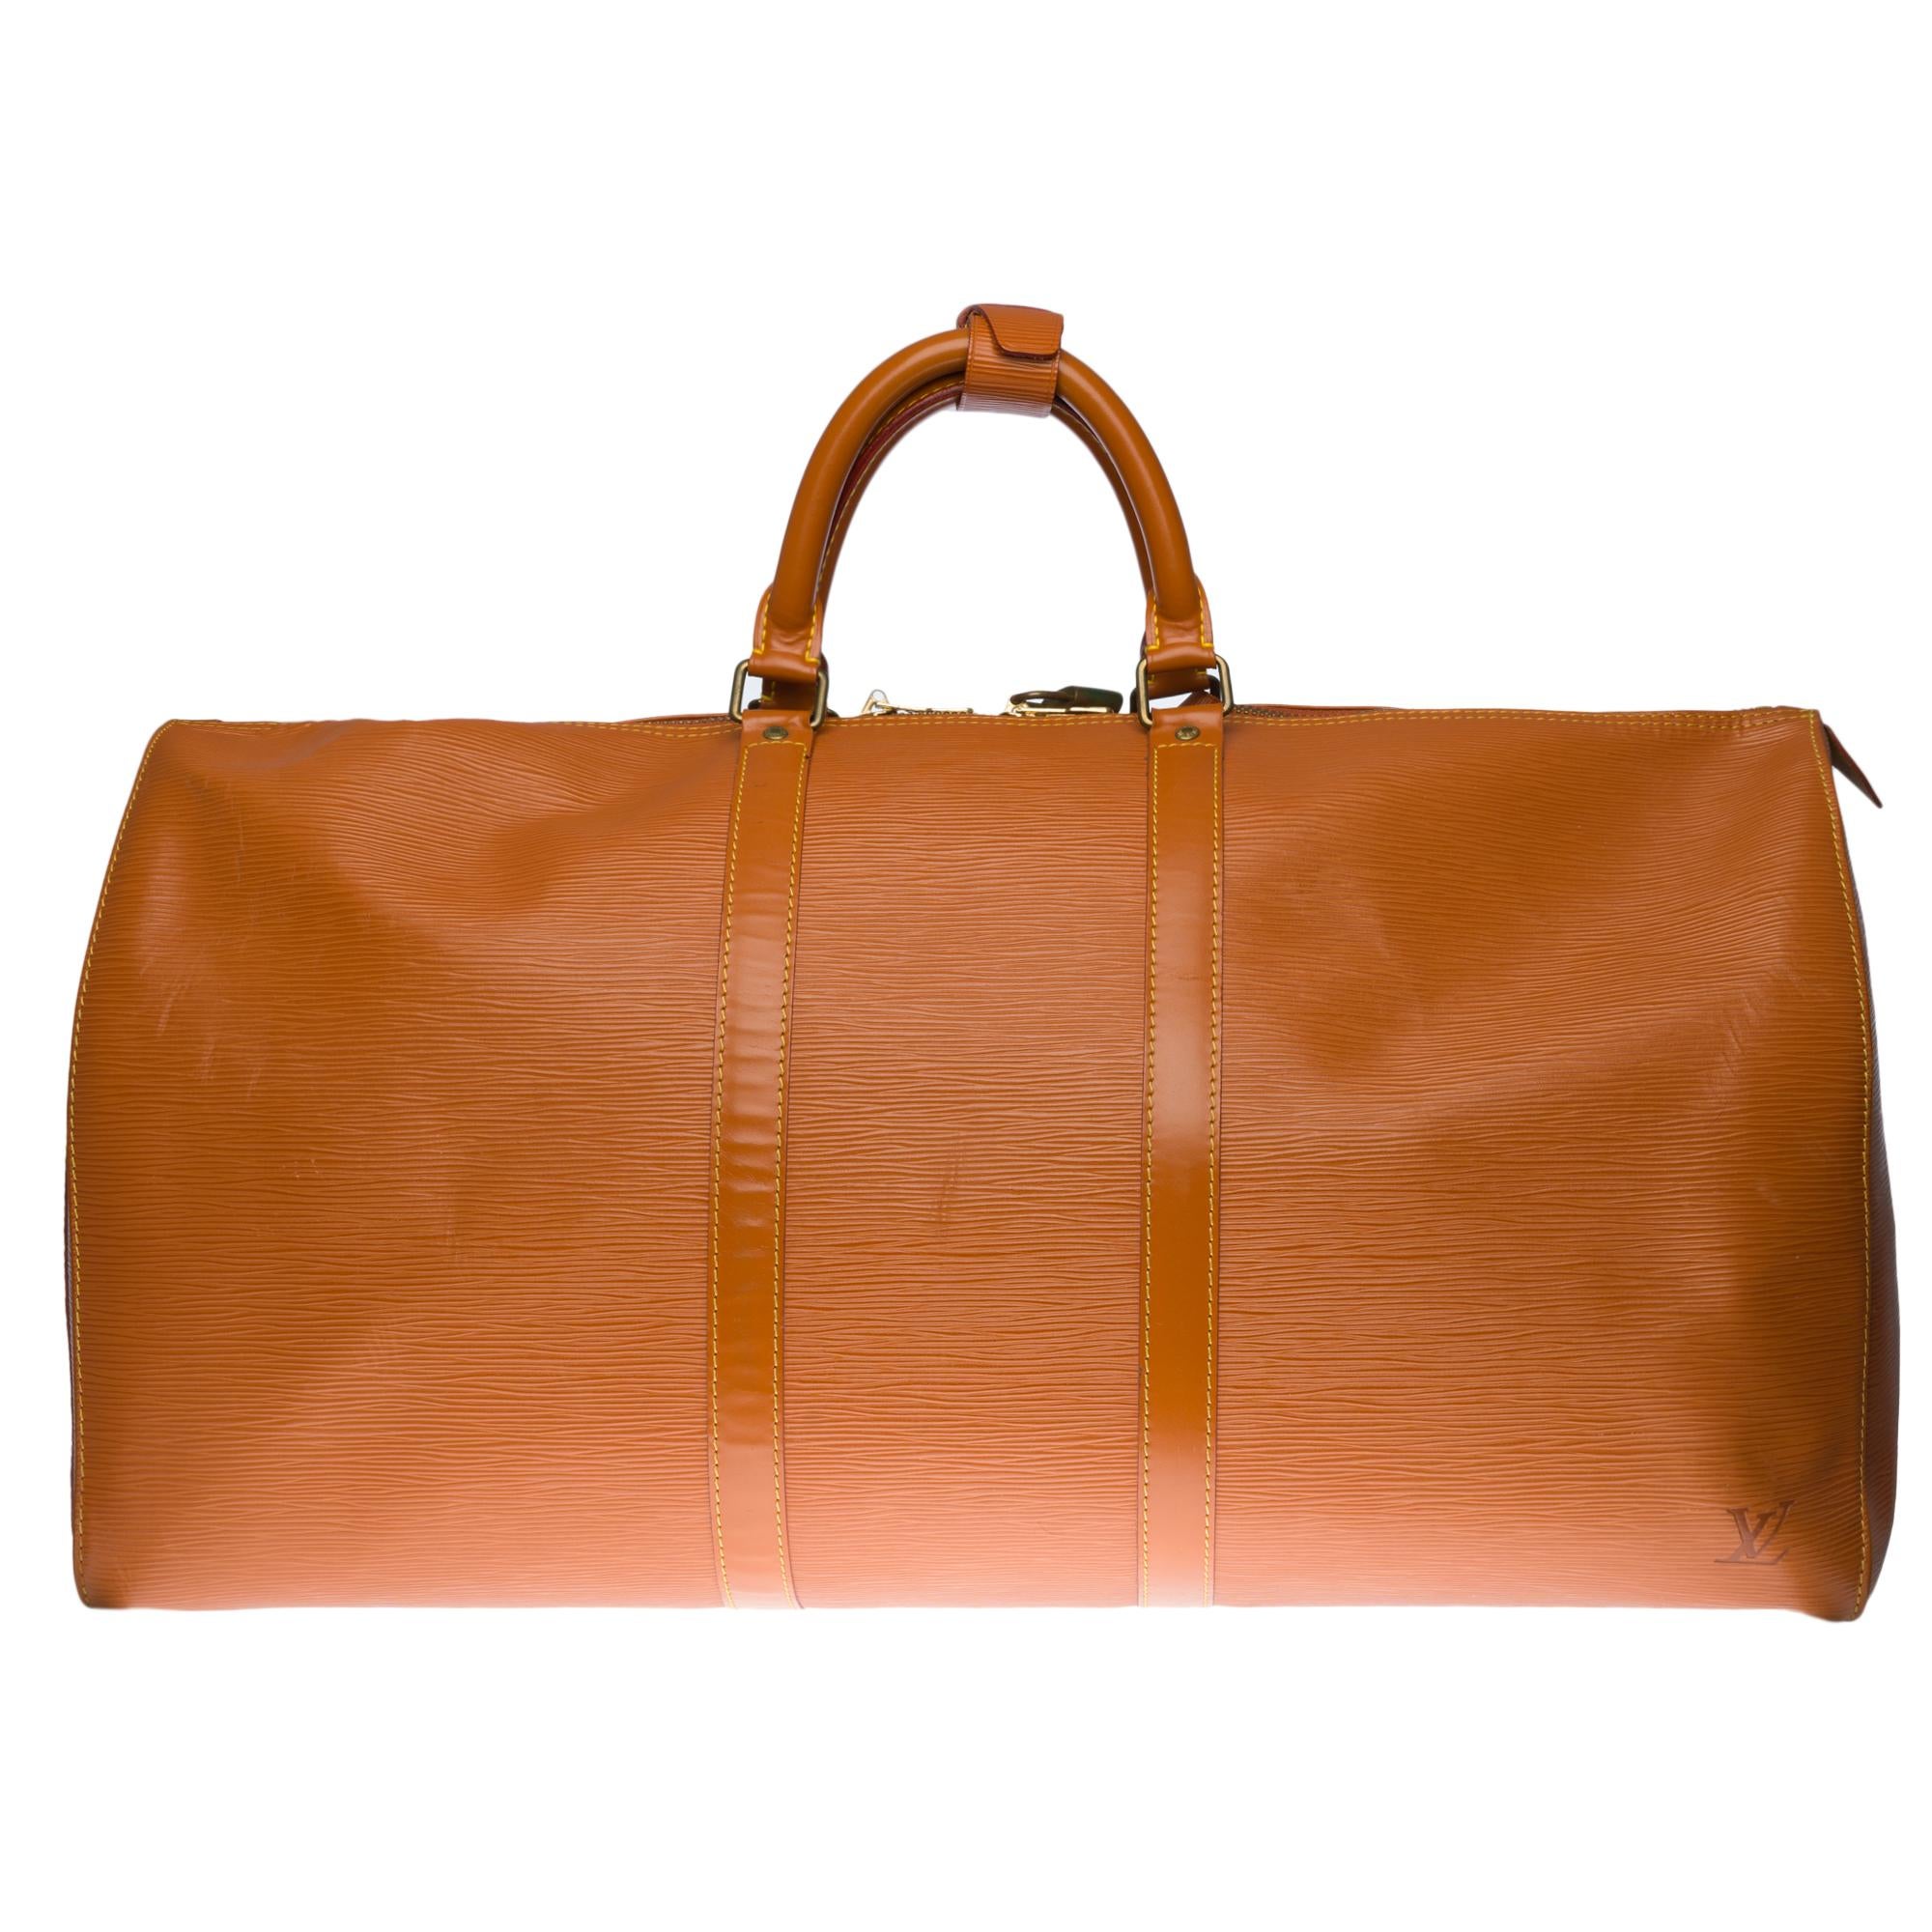 The indispensable Louis Vuitton Keepall travel bag 55 cm in Cognac epi leather with gold metal trim, double handle in black leather allowing a handheld
Double zipper
Interior lining in cognac suede
Signature: 